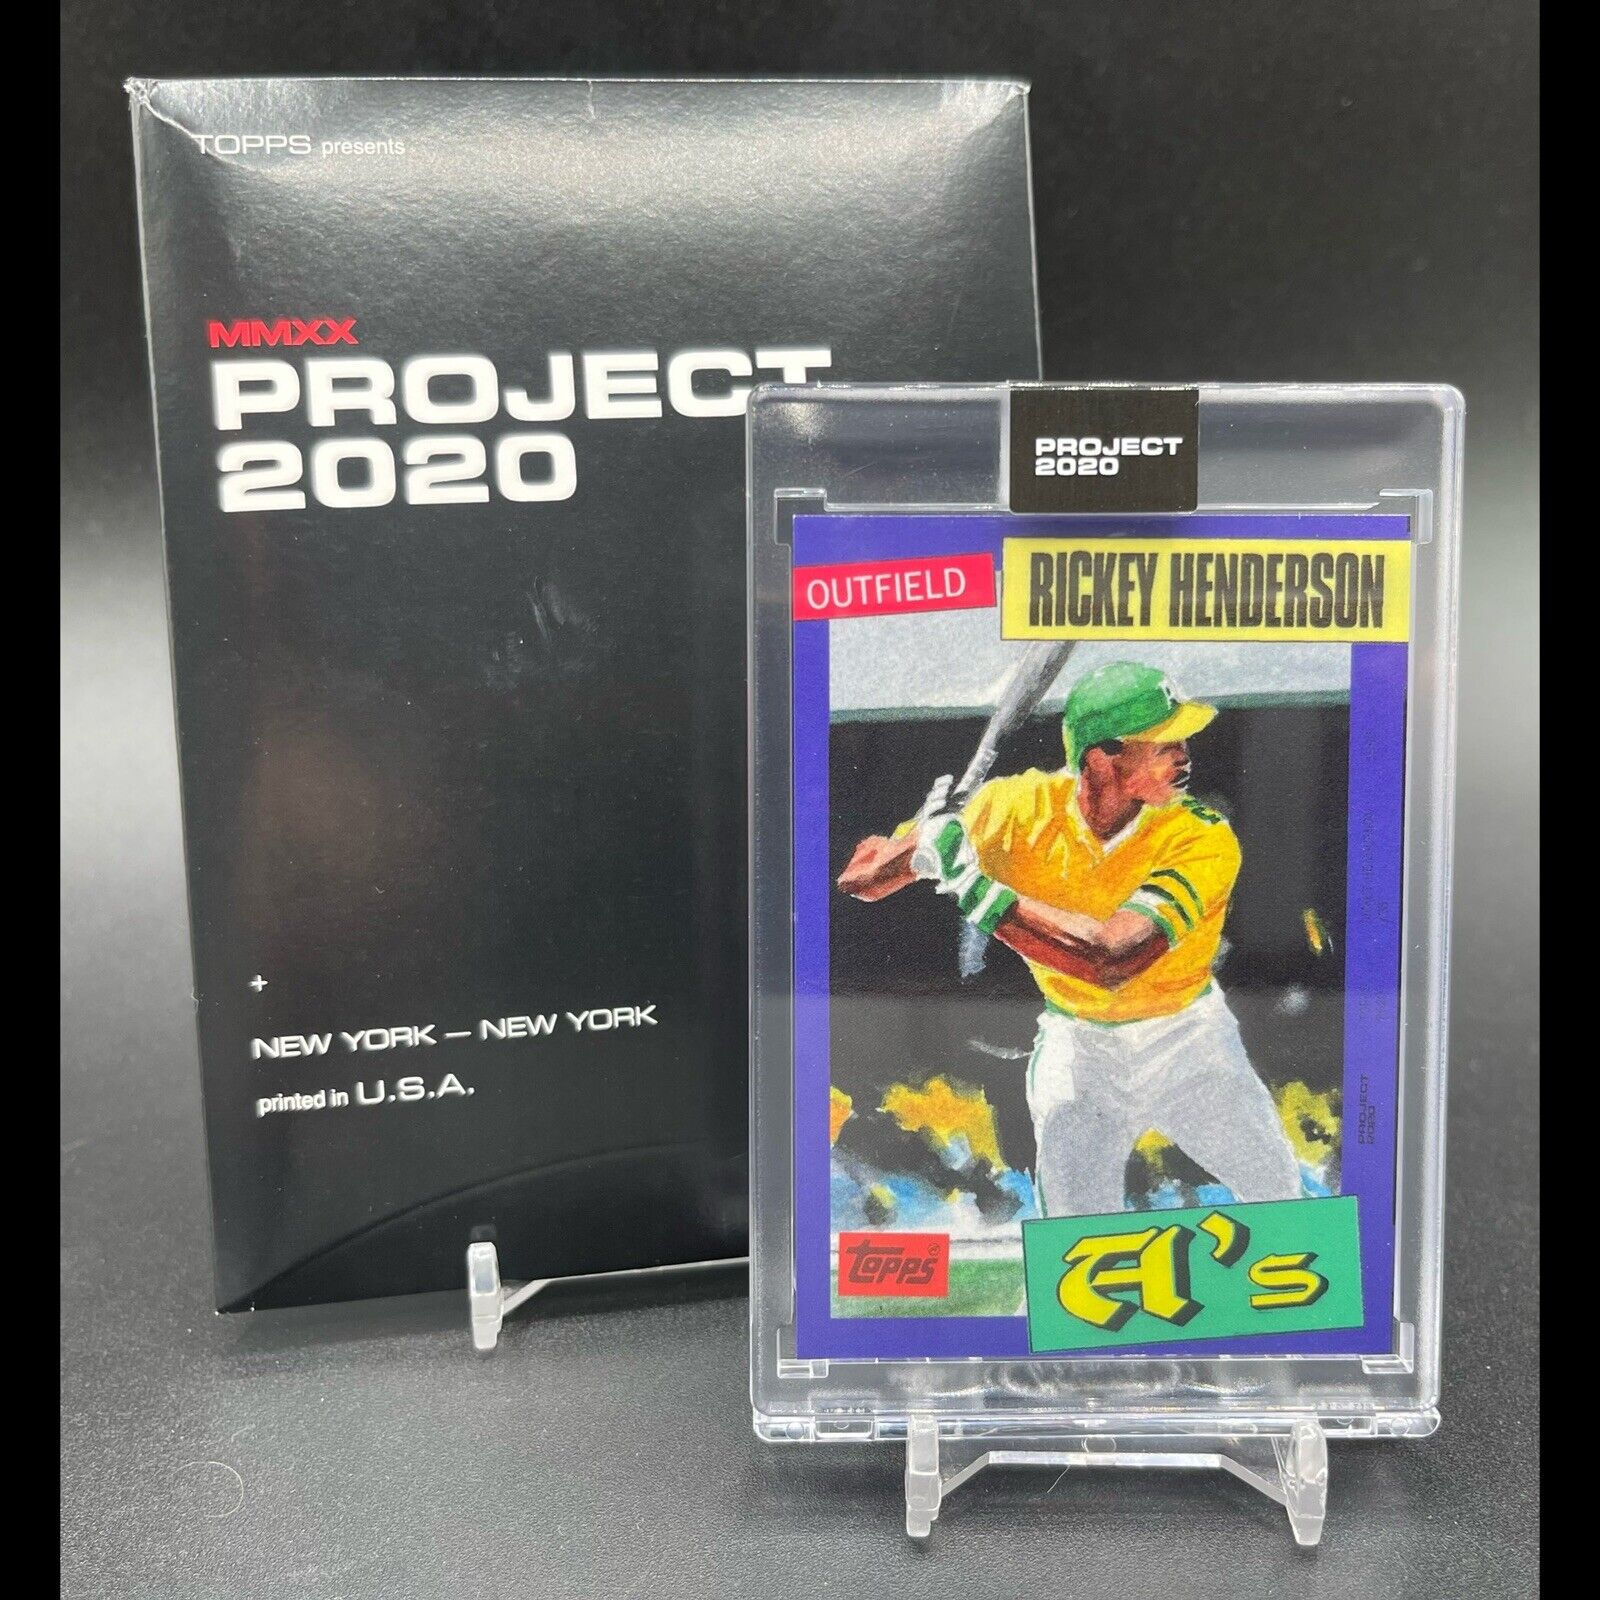 2020 Topps PROJECT 2020 Card #123 RICKEY HENDERSON by Jacob Rochester A52